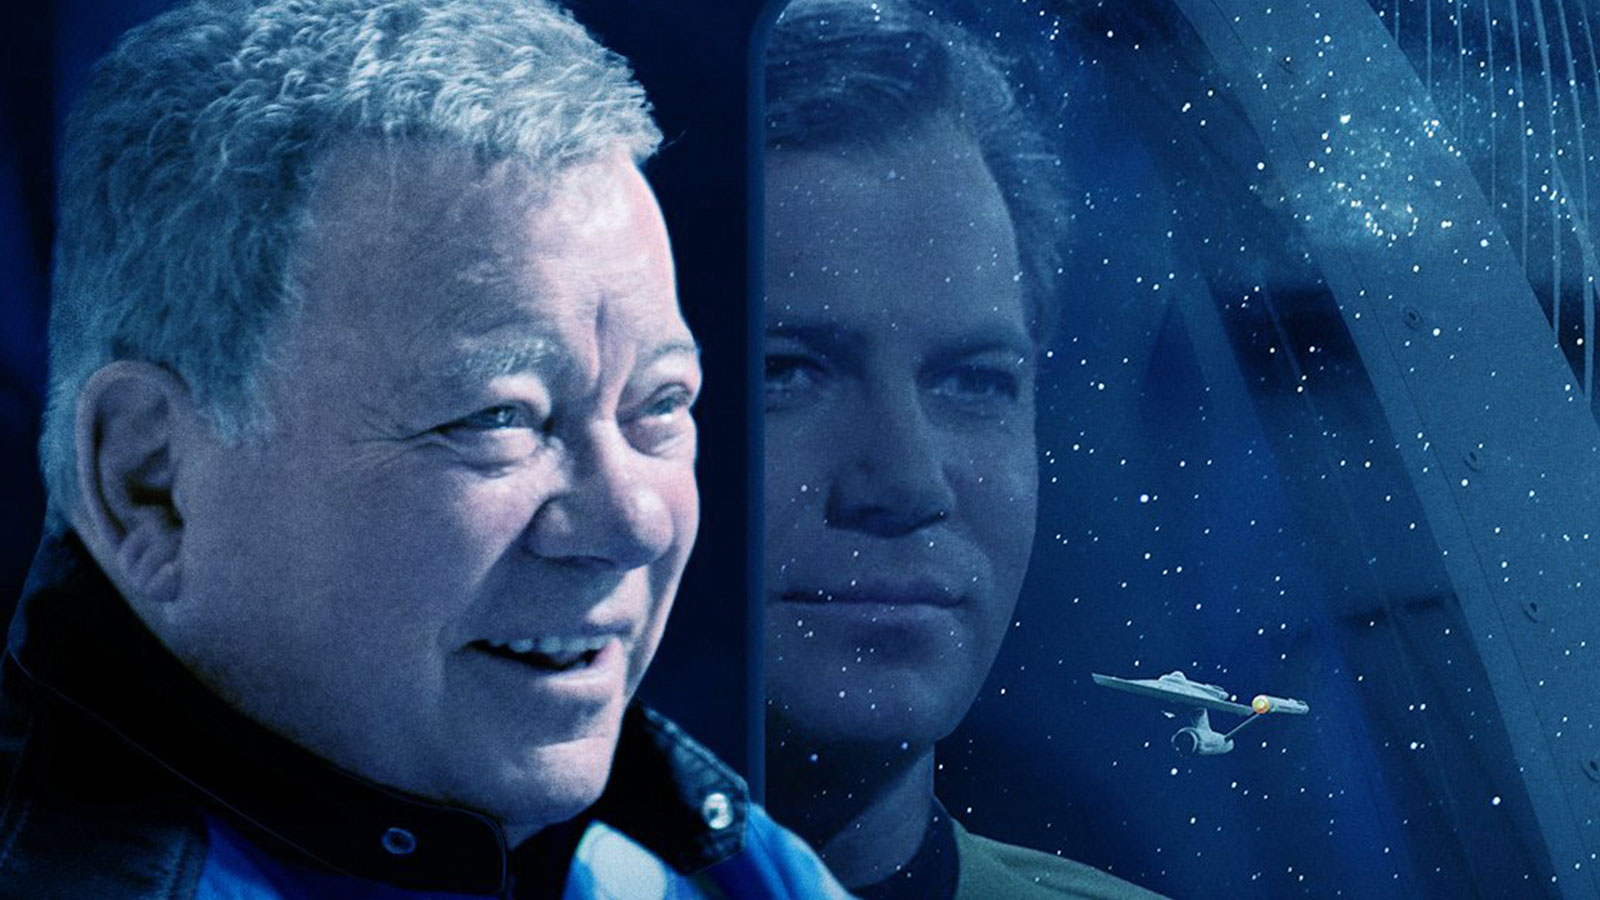 “Shatner In Space” To Debut On Amazon Prime, Documenting William Shatner’s Historic Journey To The Edge